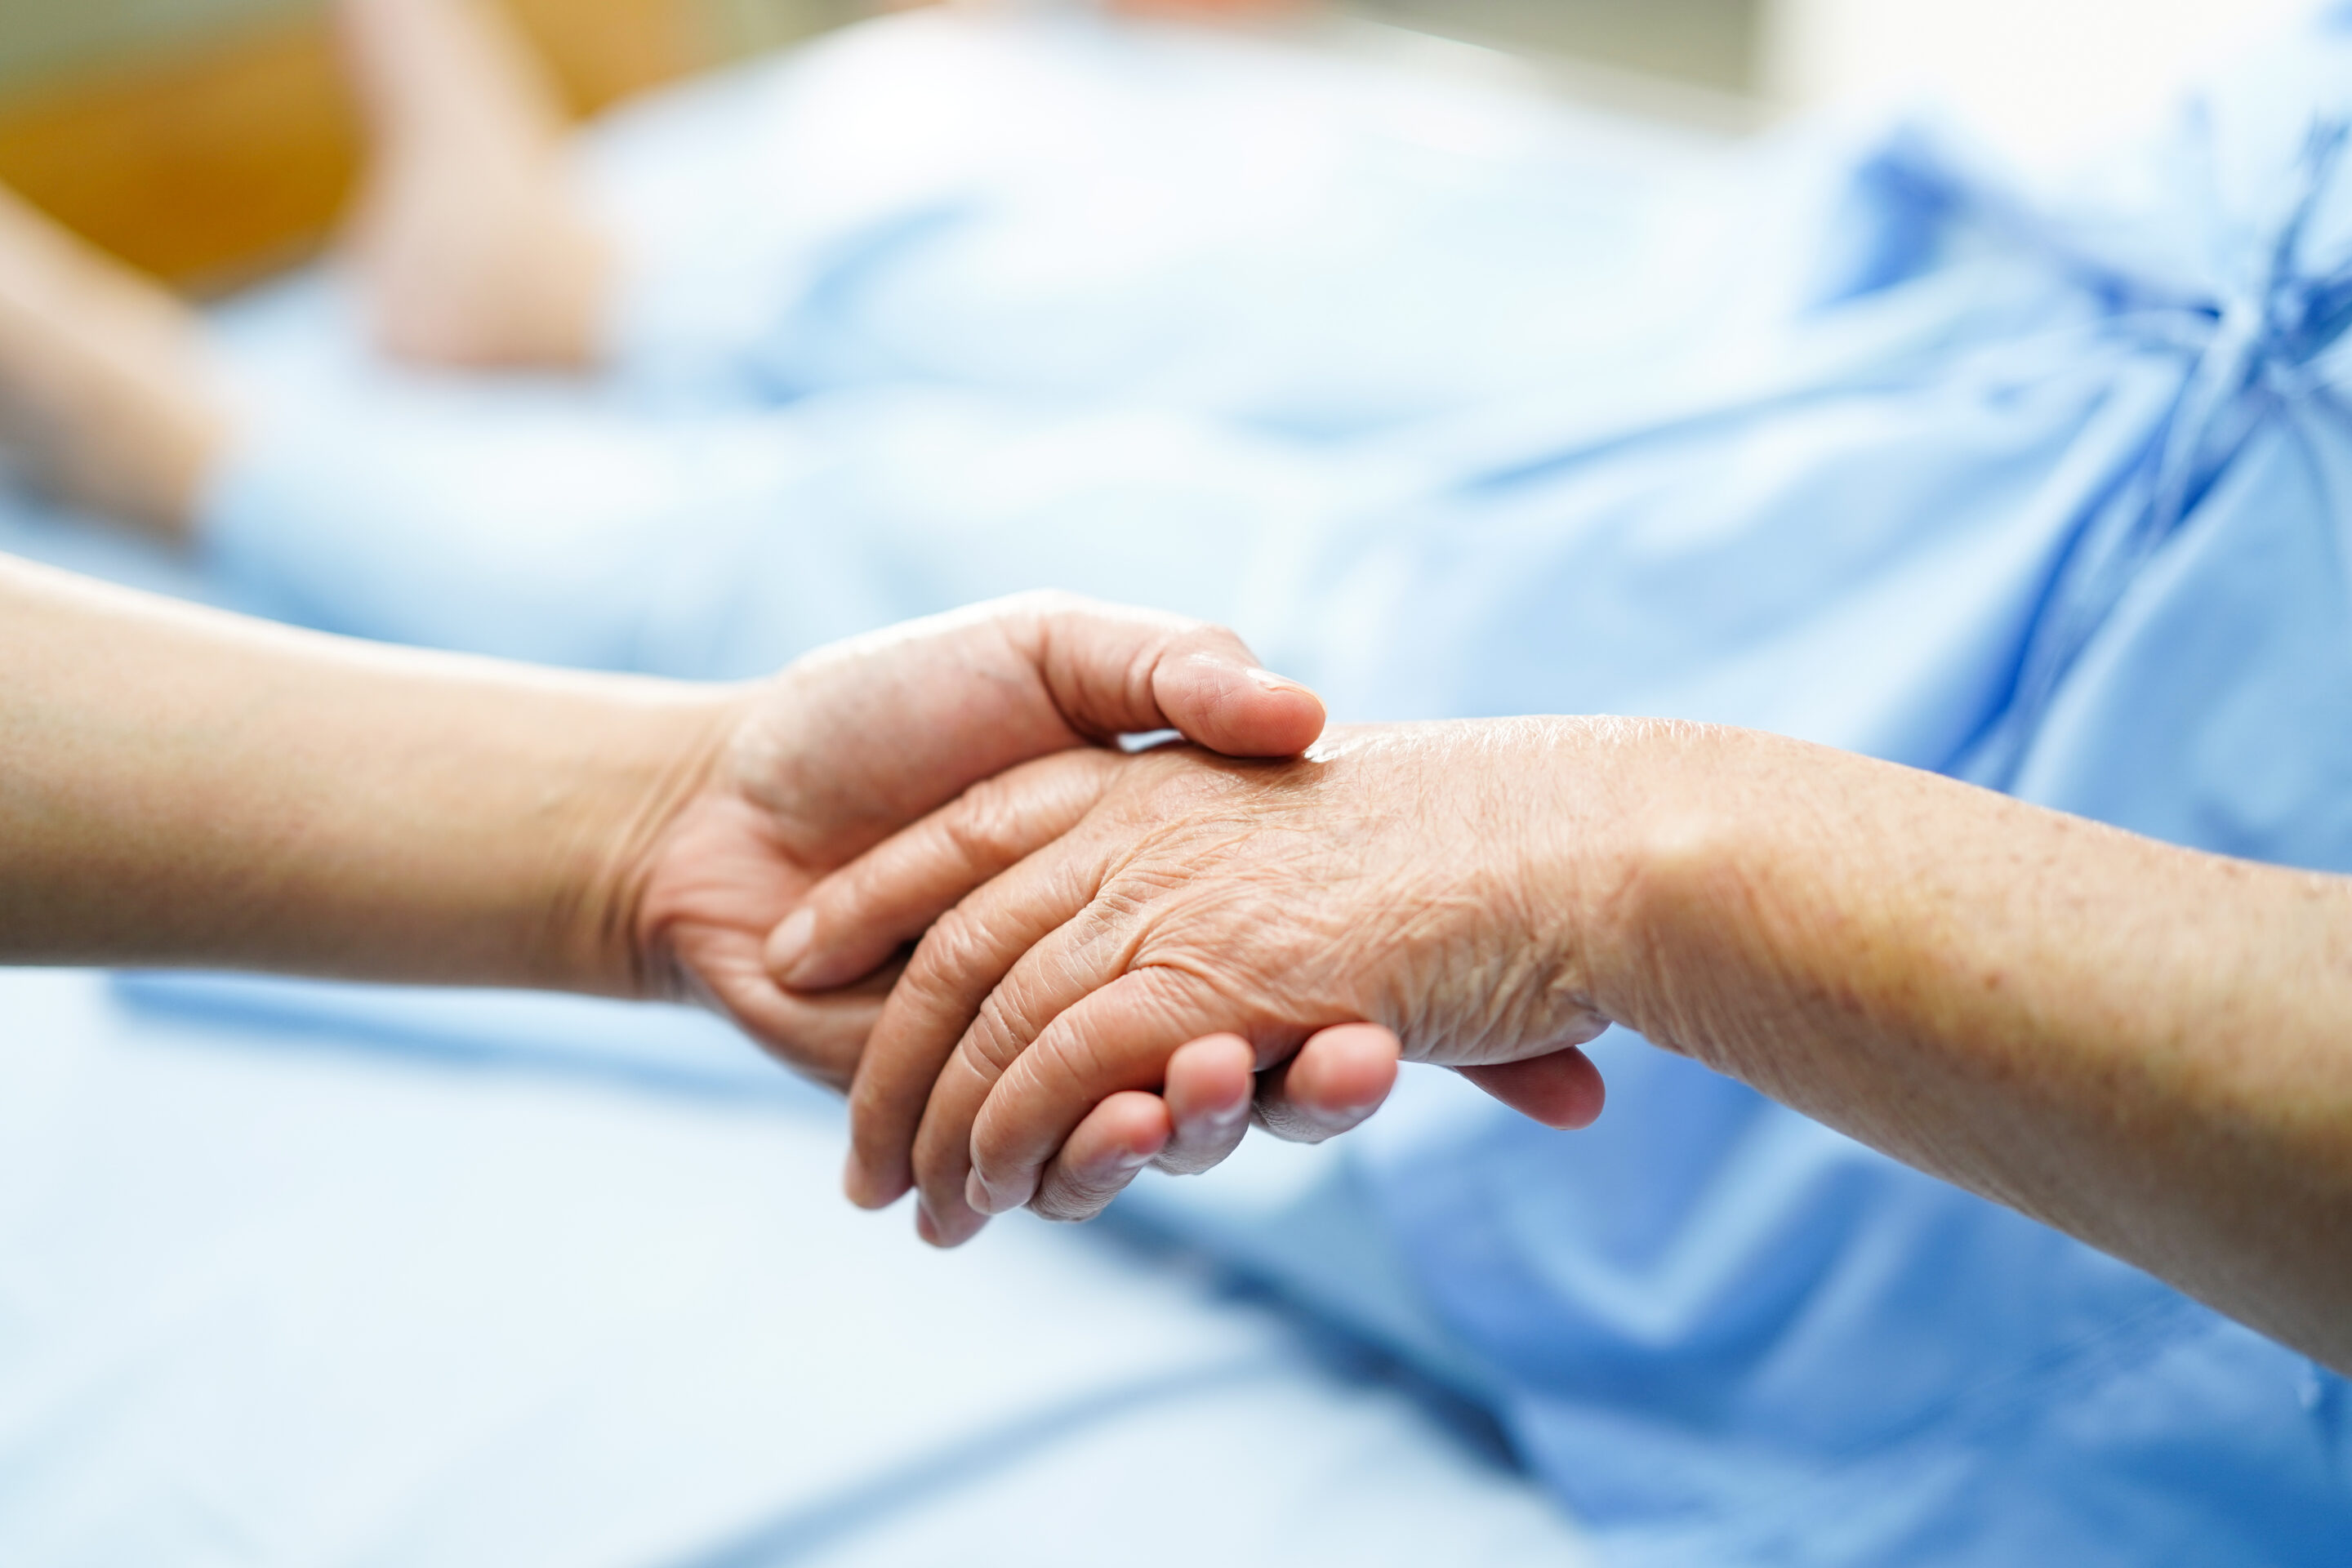 Transition Care can help you recover after being in hospital